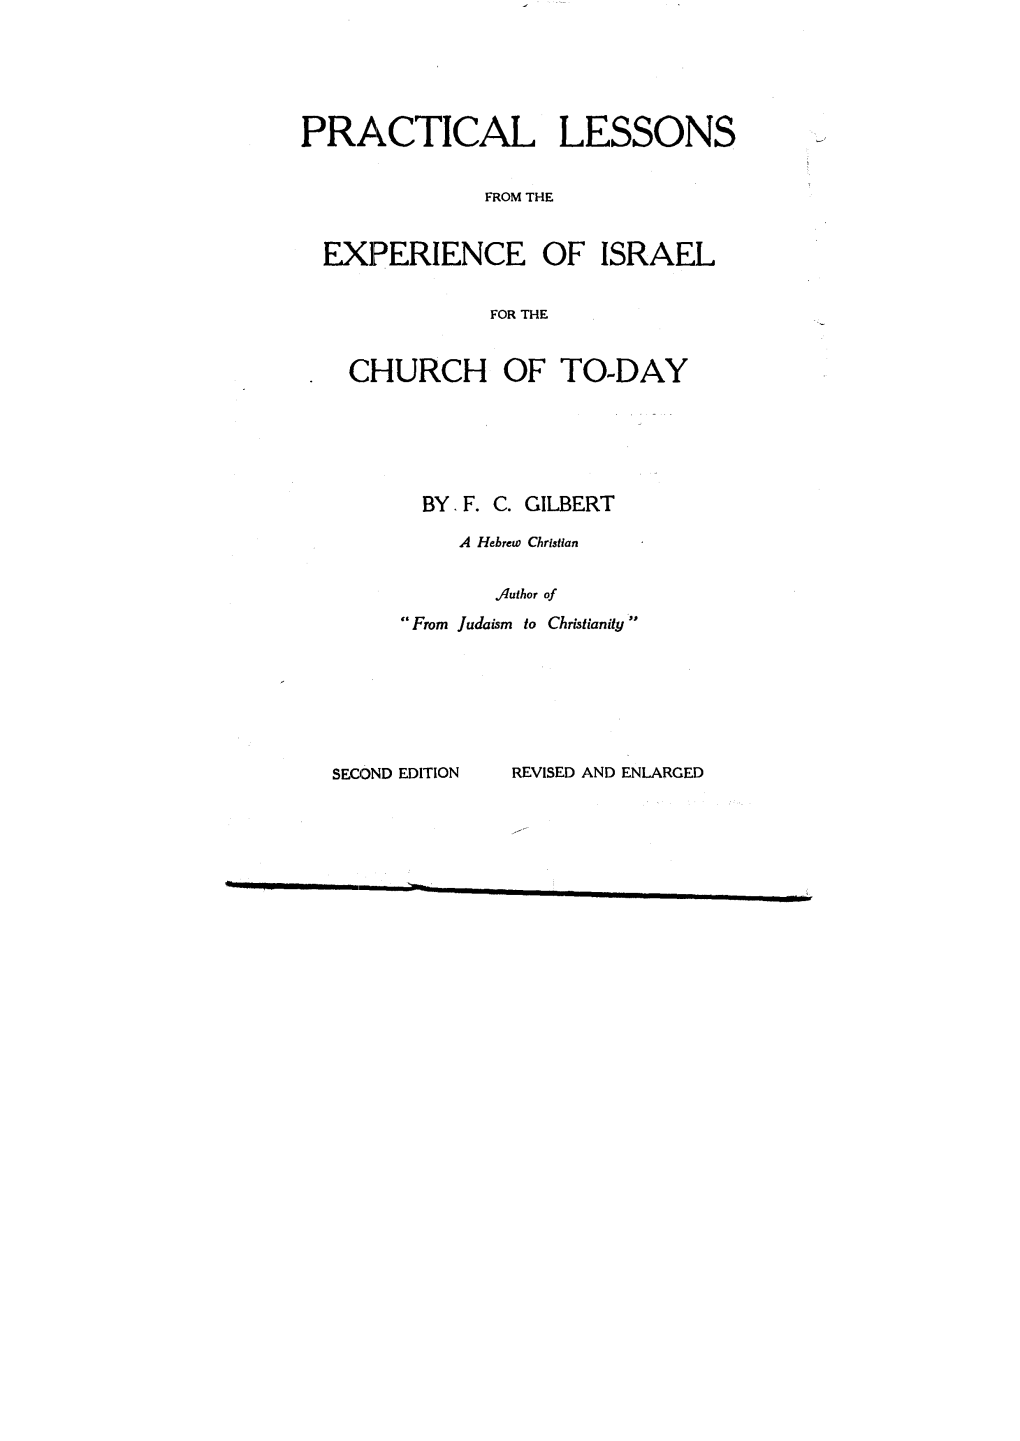 Practical Lessons from the Experience of Israel for the Church of Today